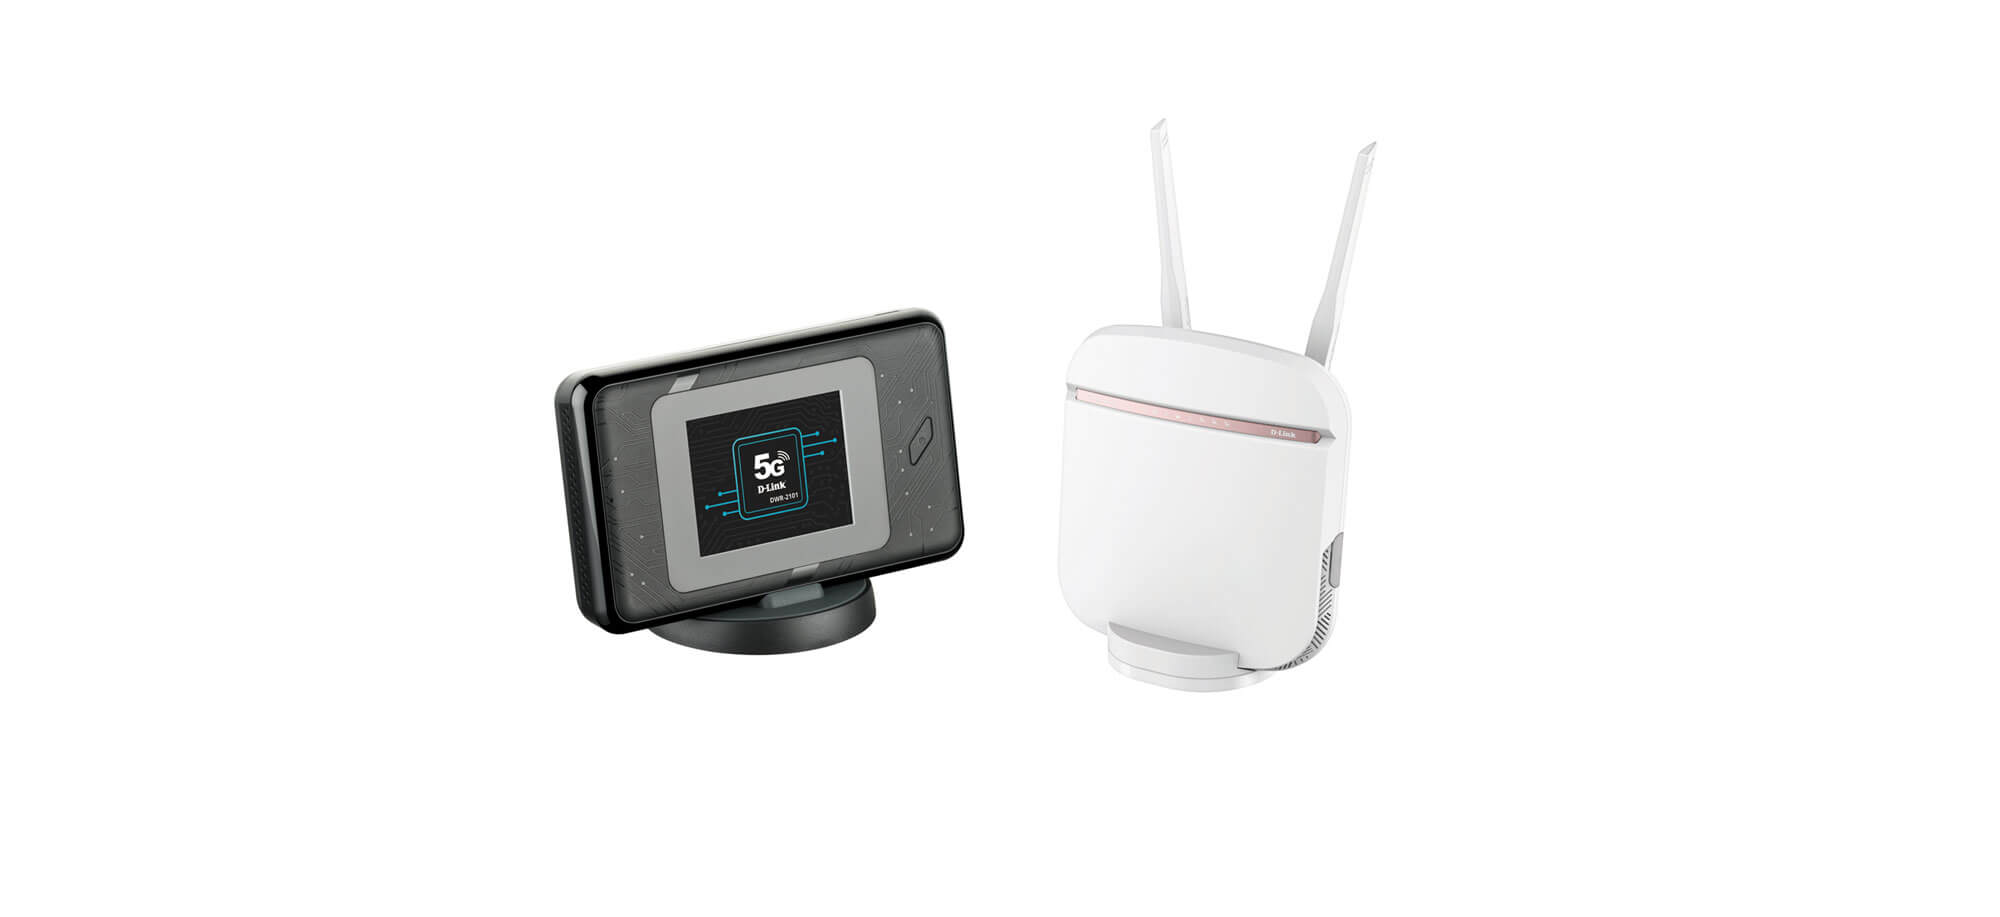 DWR-2101 5G WiFi 6 Mobile Hotspot and DWR-978 5G AC2600 Wi-Fi Router